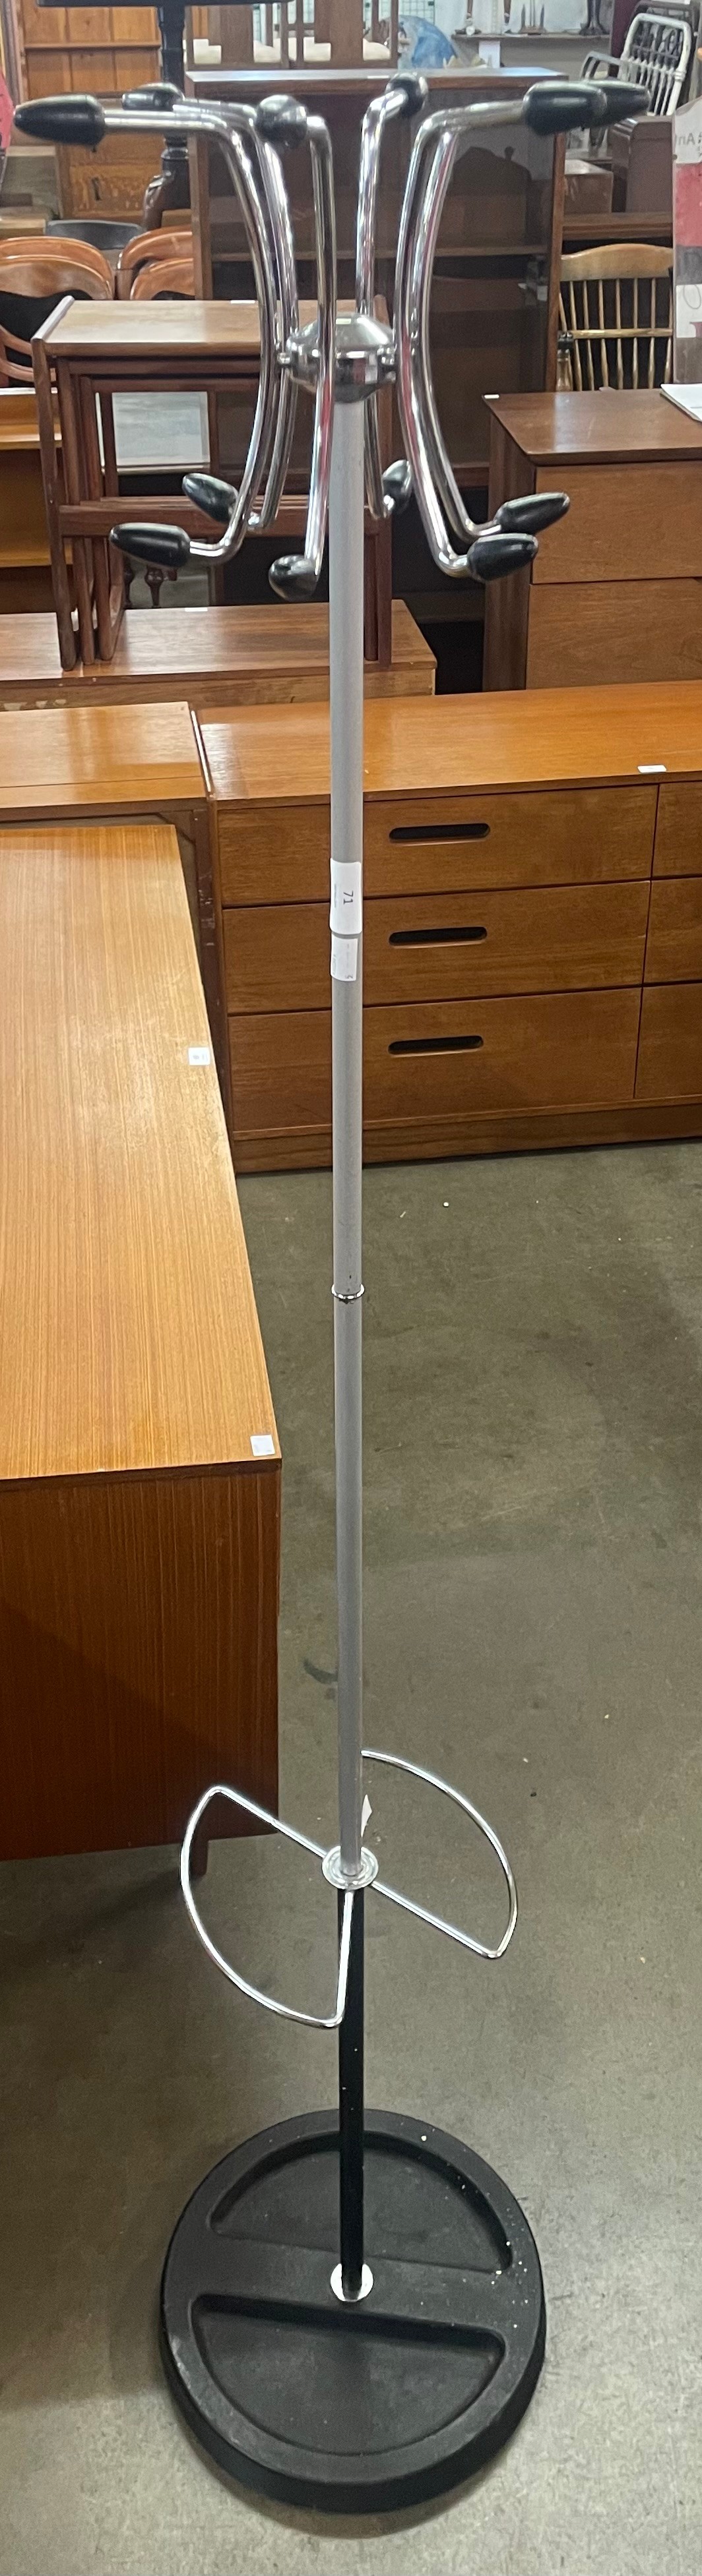 A metal atomic coat stand